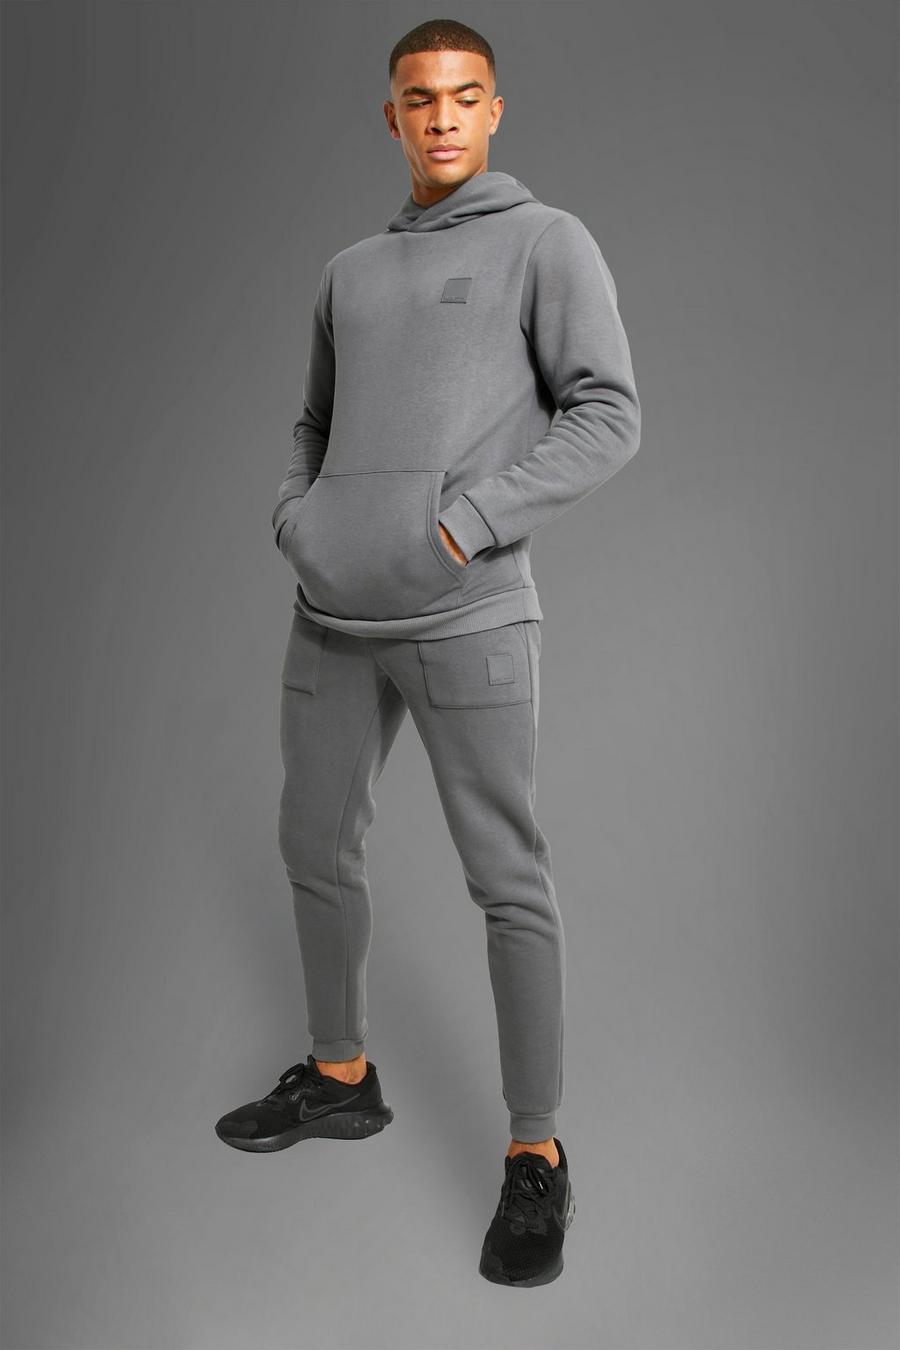 Chándal MAN Active deportivo con capucha, Charcoal gris